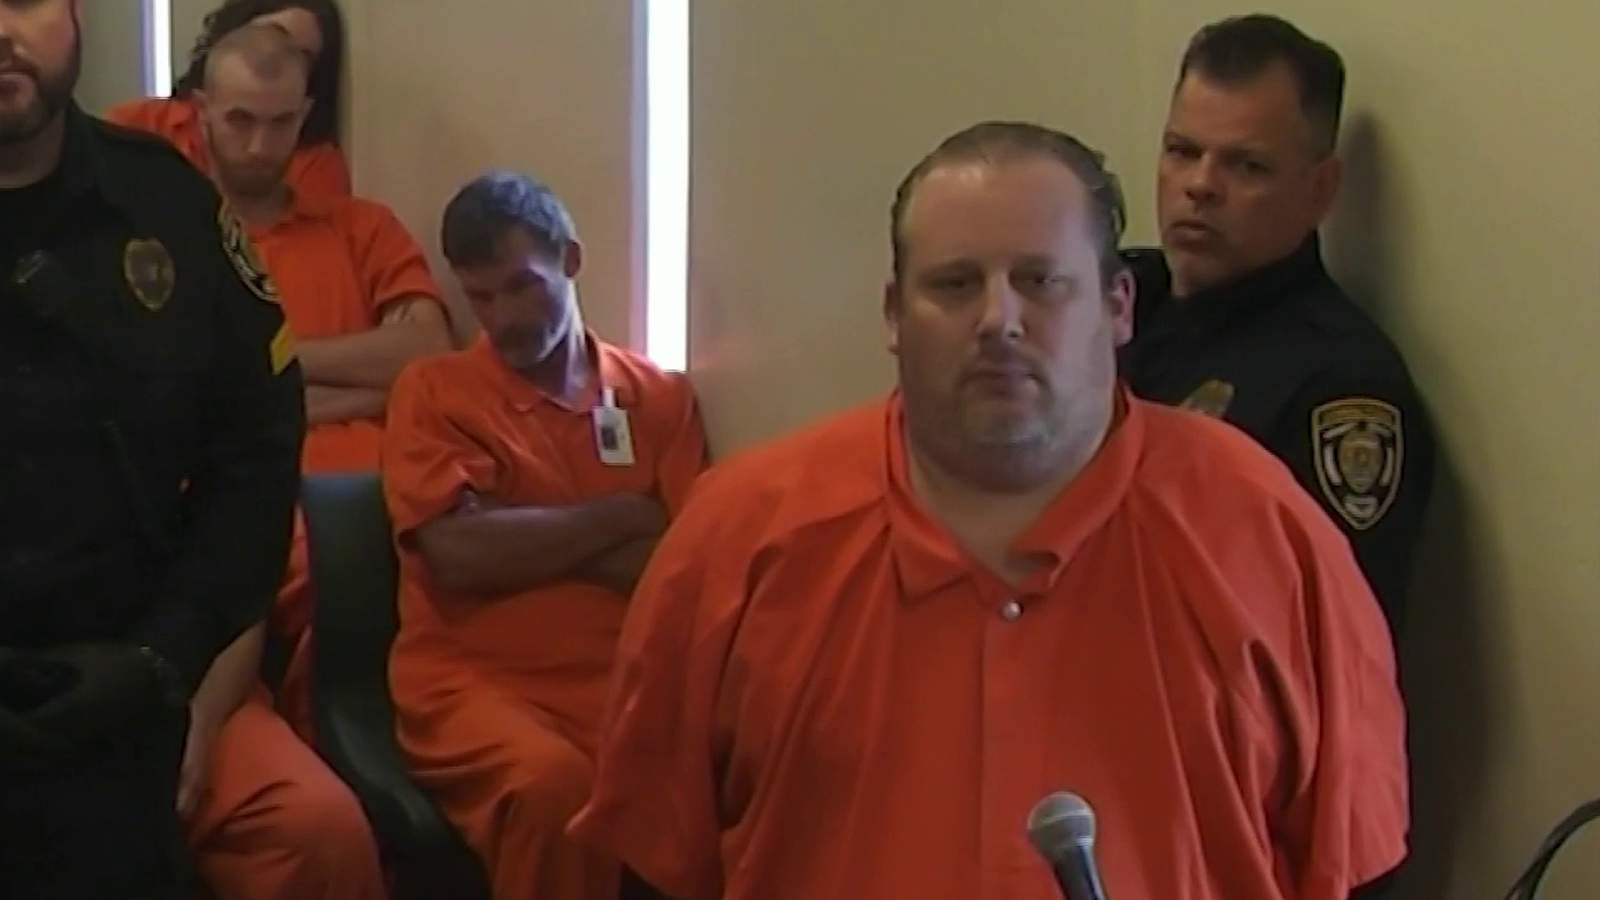 Video: Man accused of killing family in Celebration appears in court